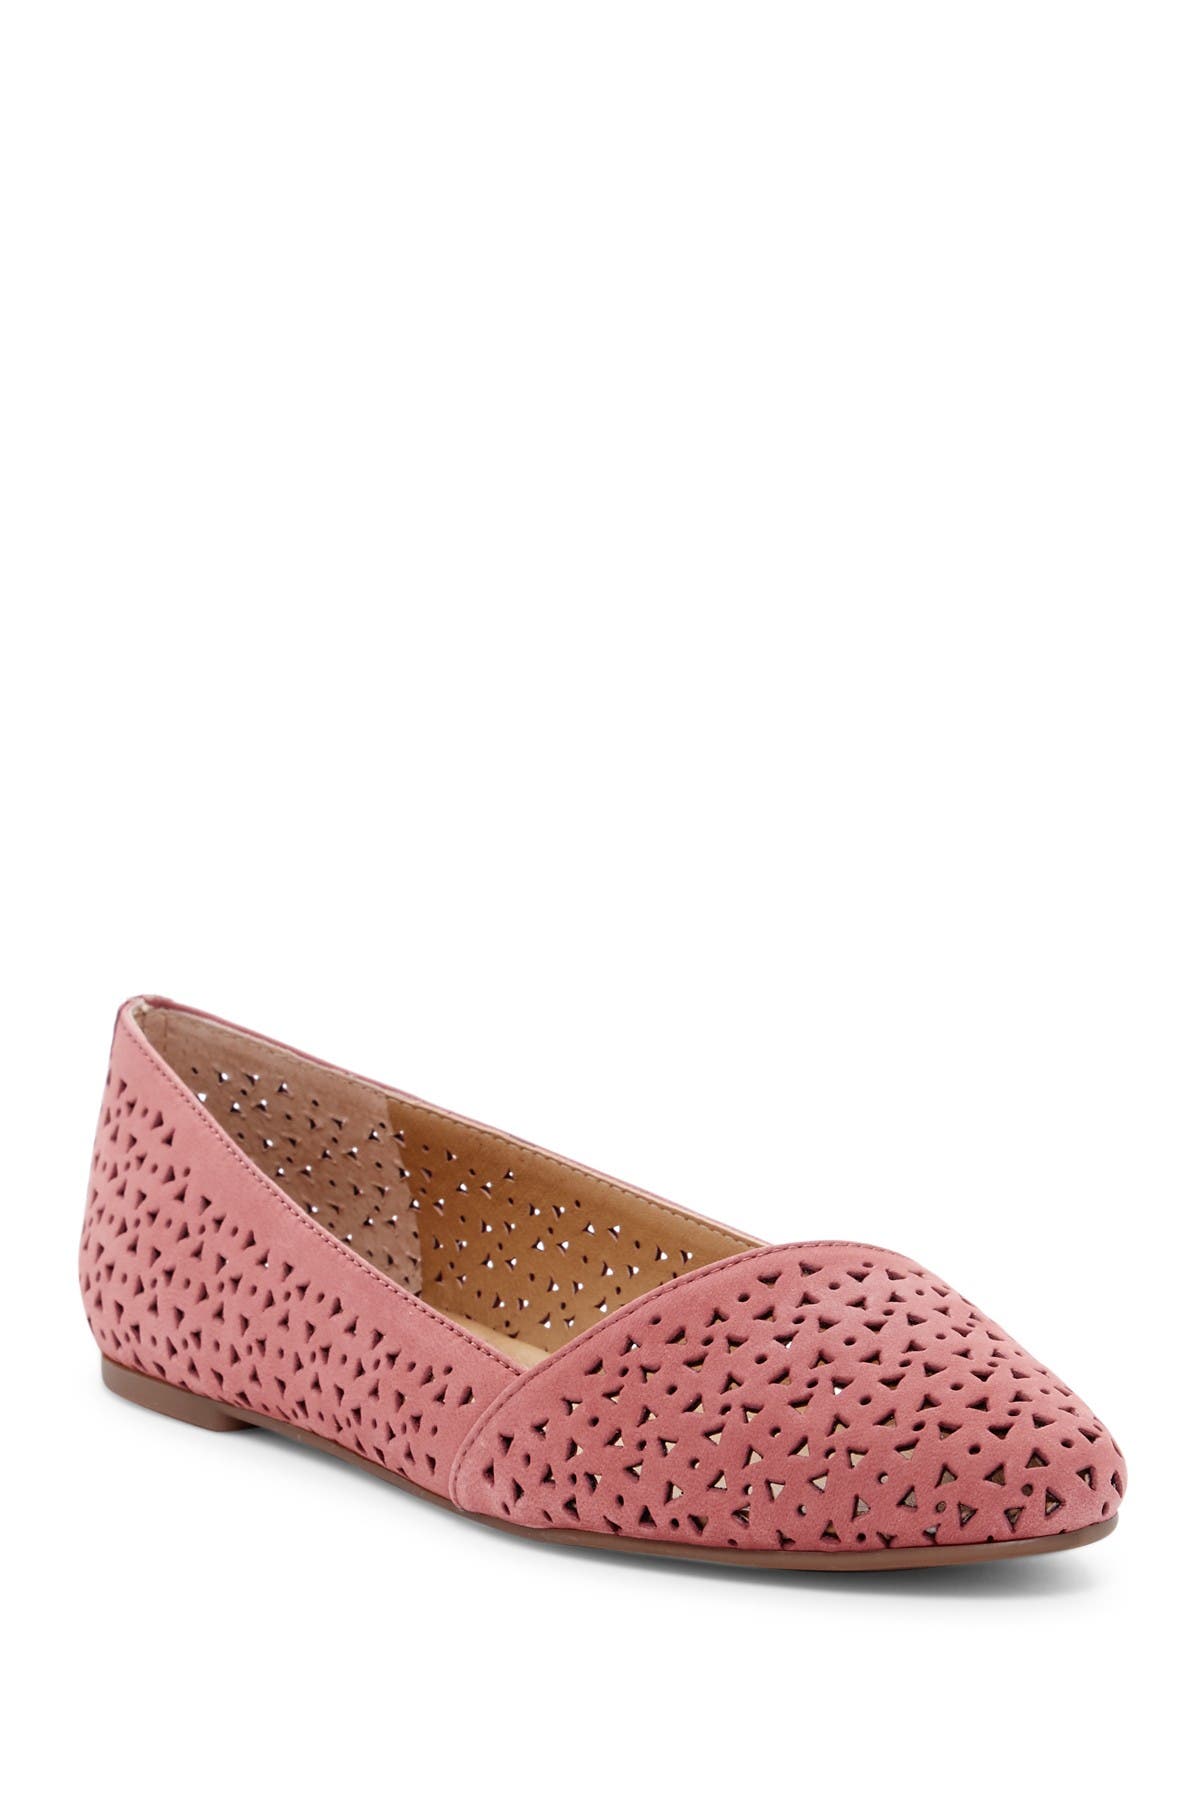 lucky brand perforated flats